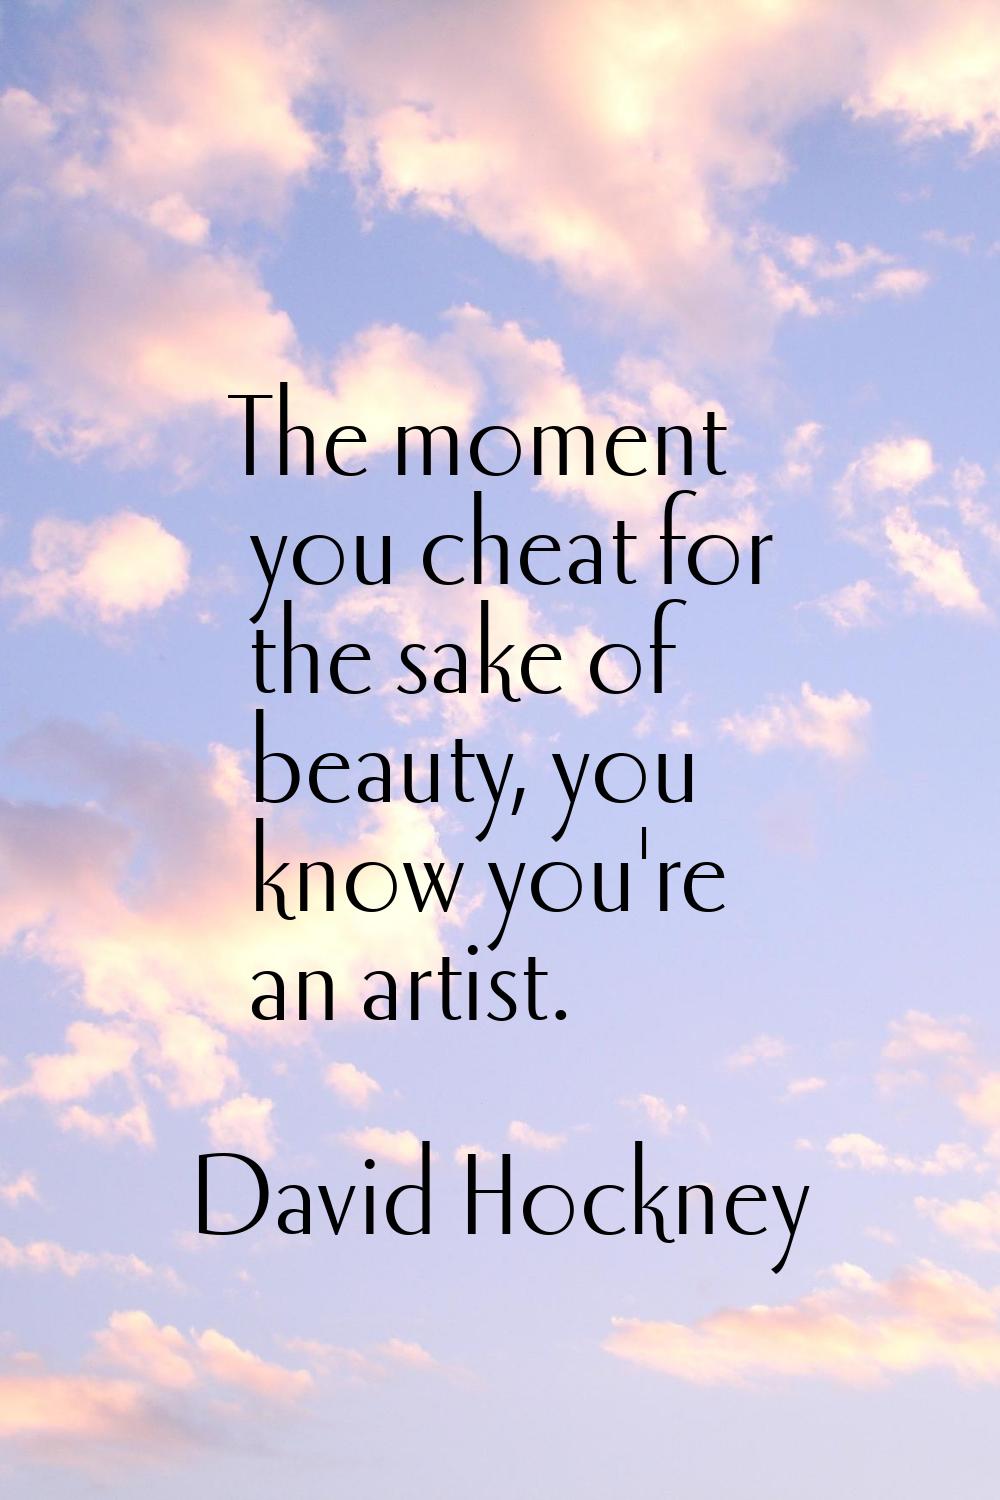 The moment you cheat for the sake of beauty, you know you're an artist.